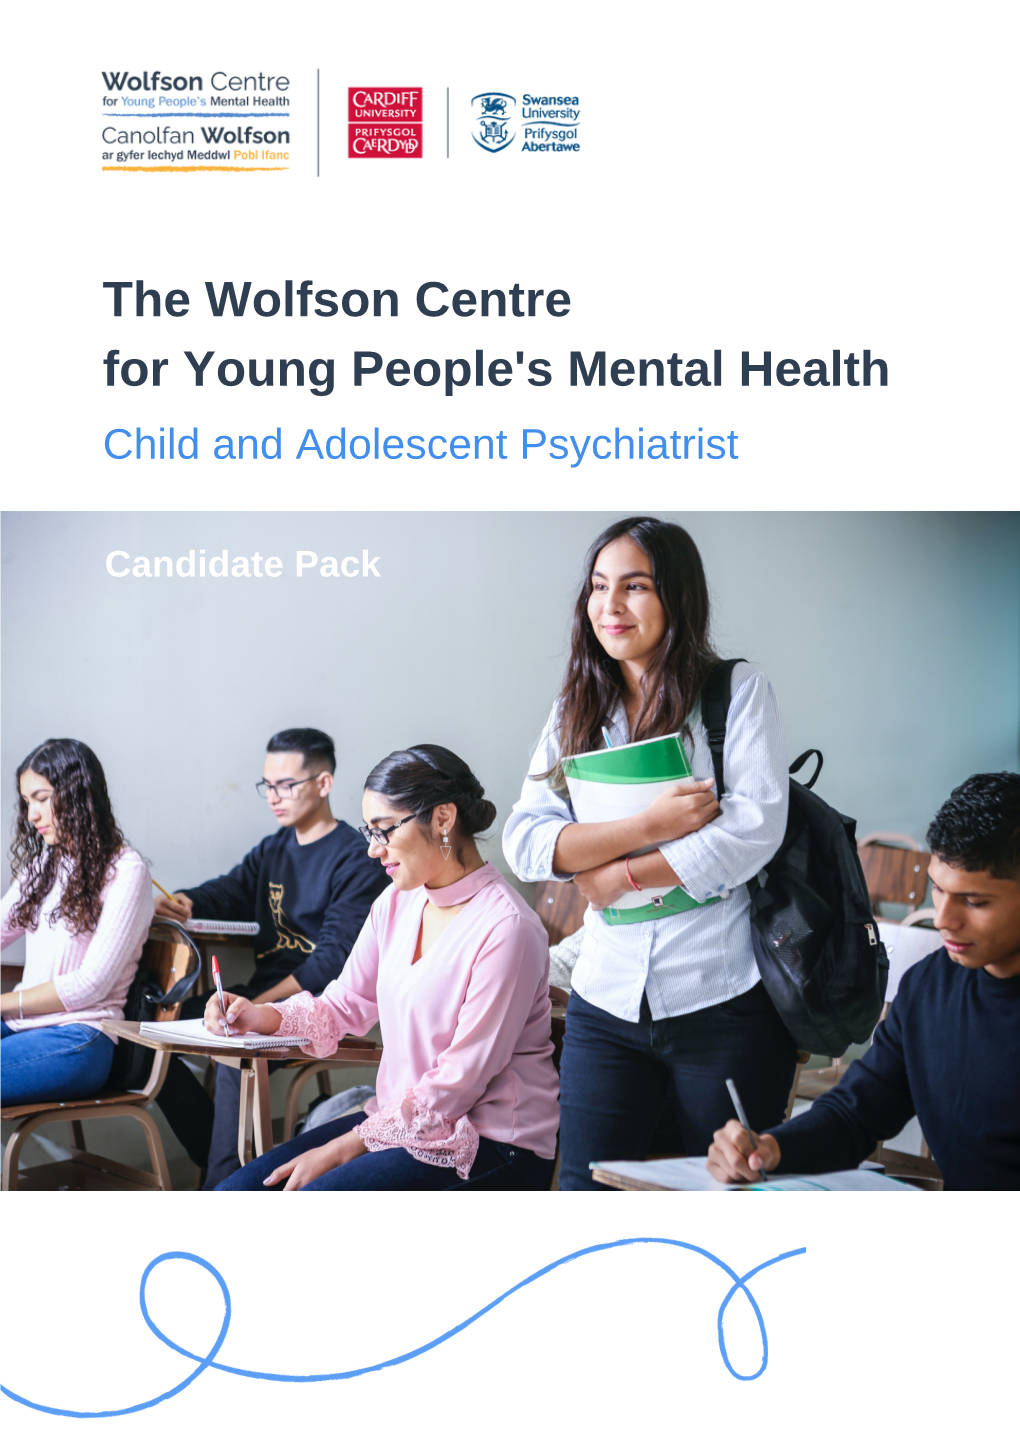 The Wolfson Centre for Young People's Mental Health Child and Adolescent Psychiatrist